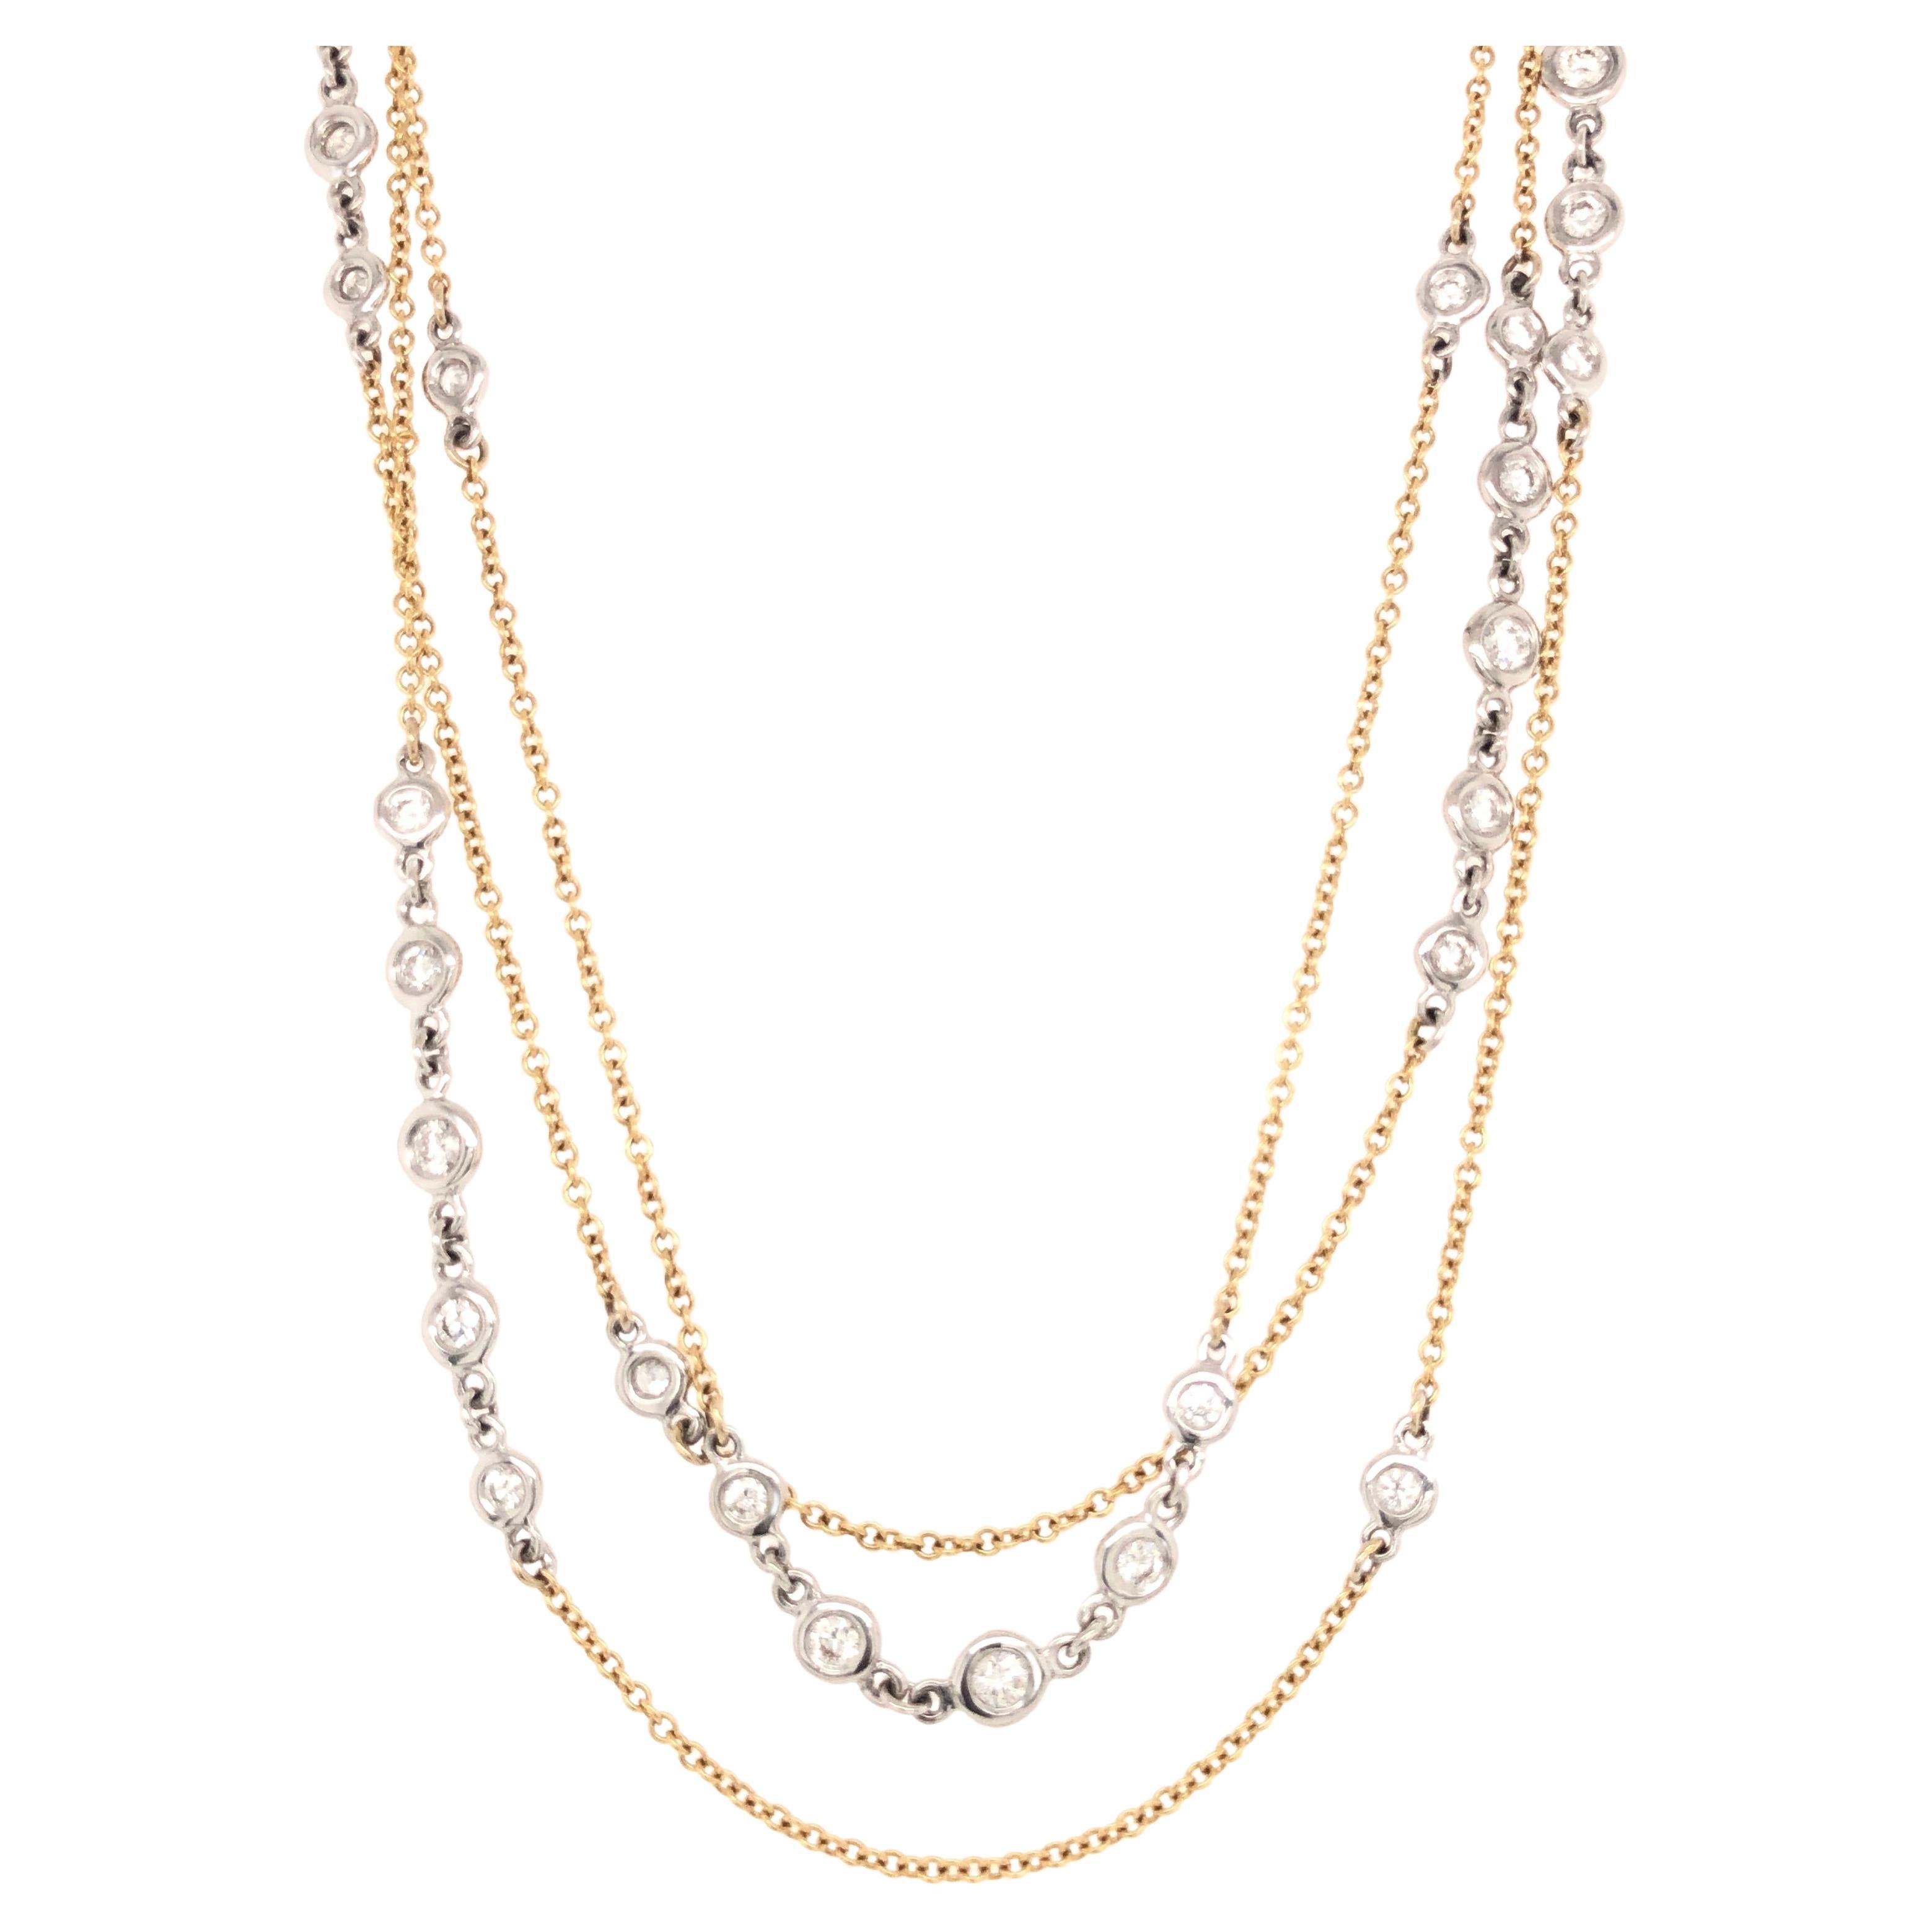 A Link Bezel Diamonds by the Yard Necklace 36" in Length 18K White & Yellow Gold